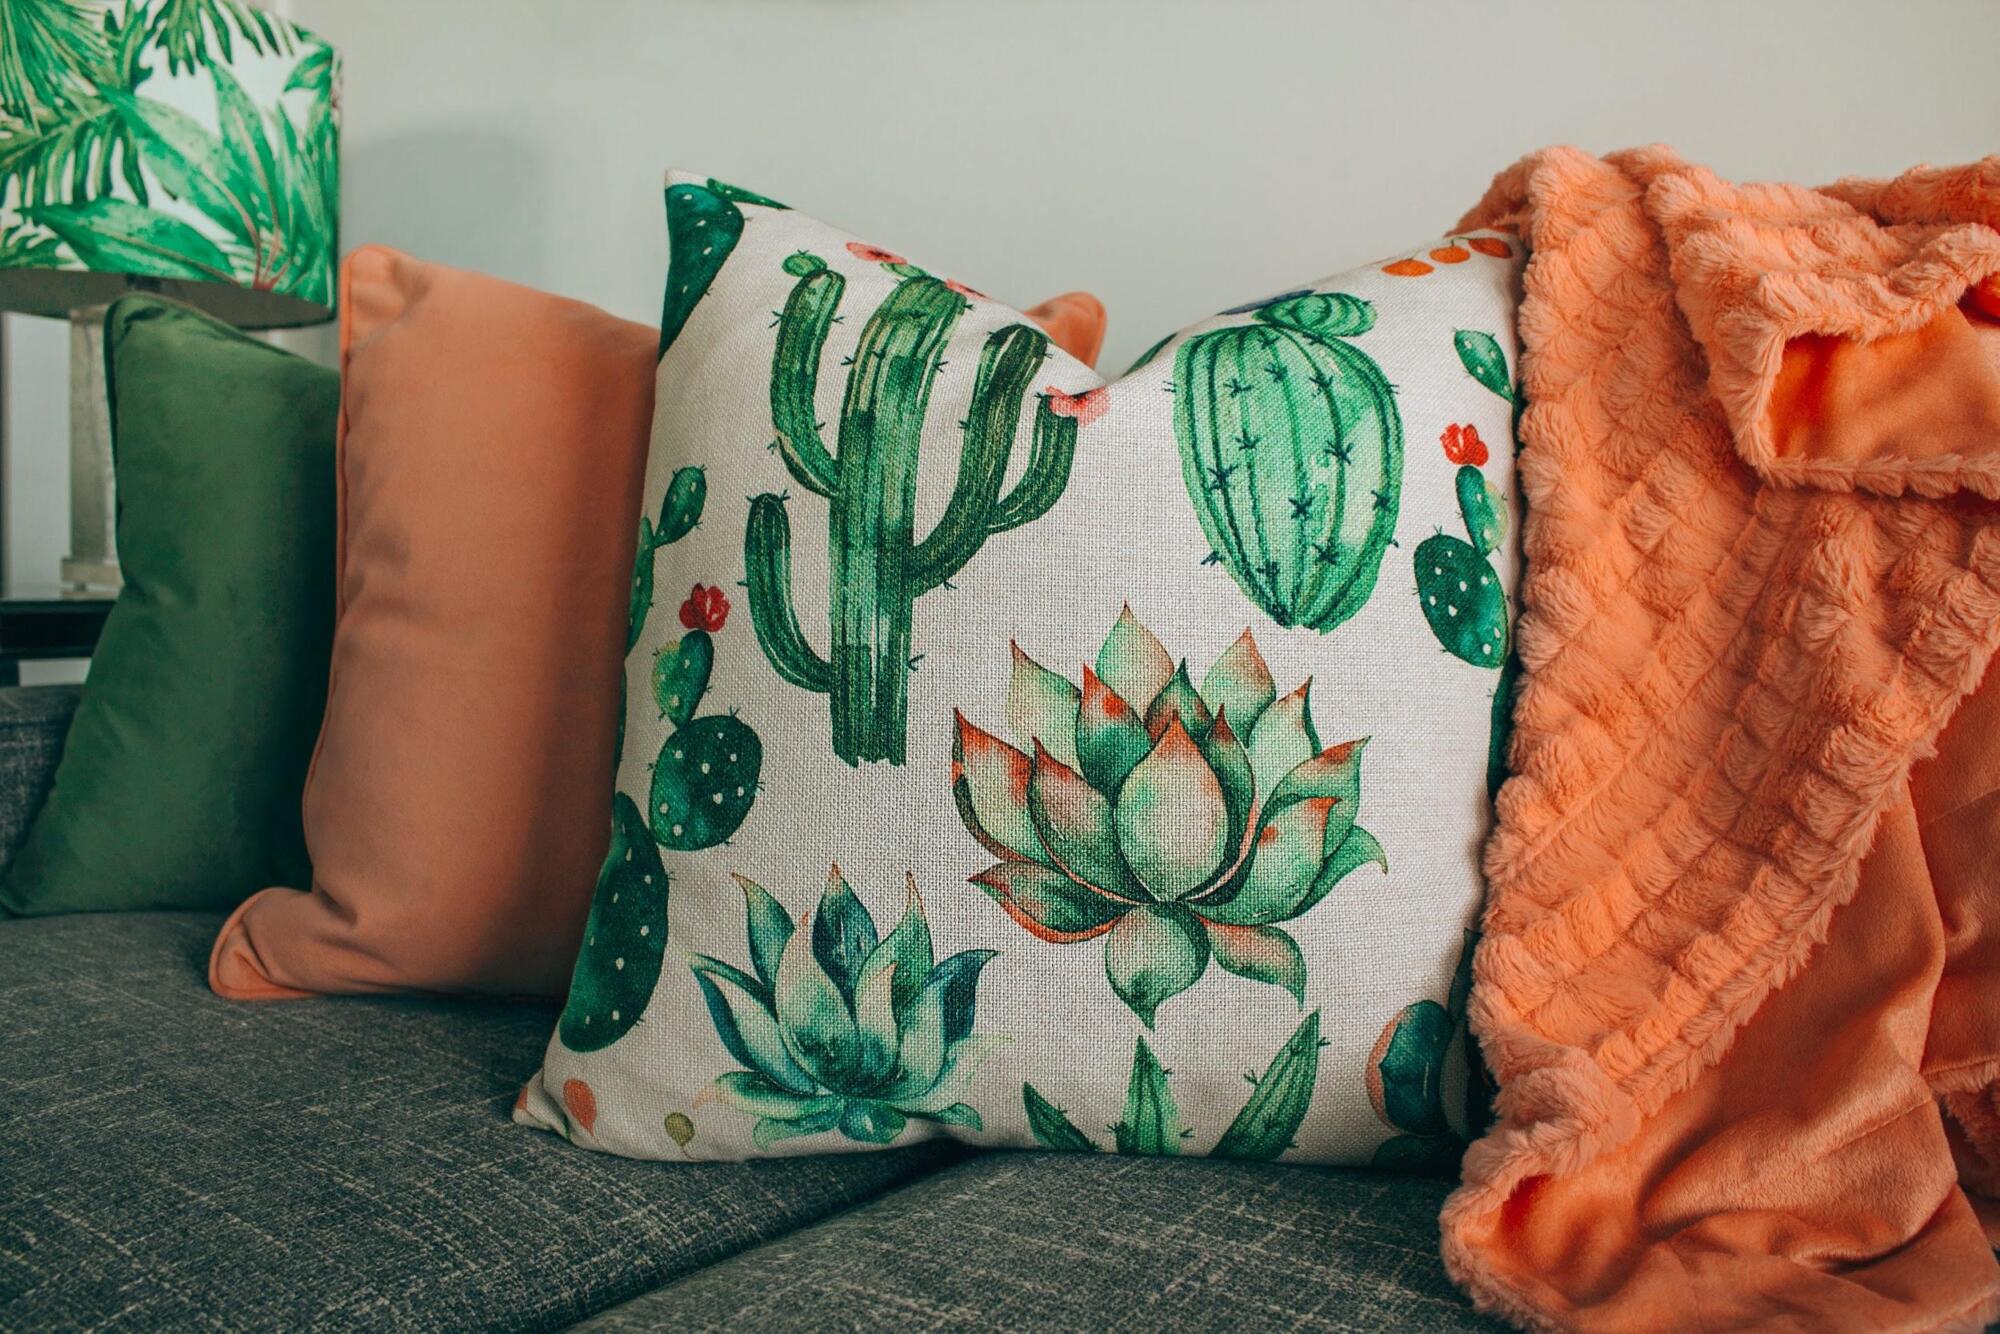 Cactus pillows on a couch with an orange throw, featuring bamboo pillow benefits.